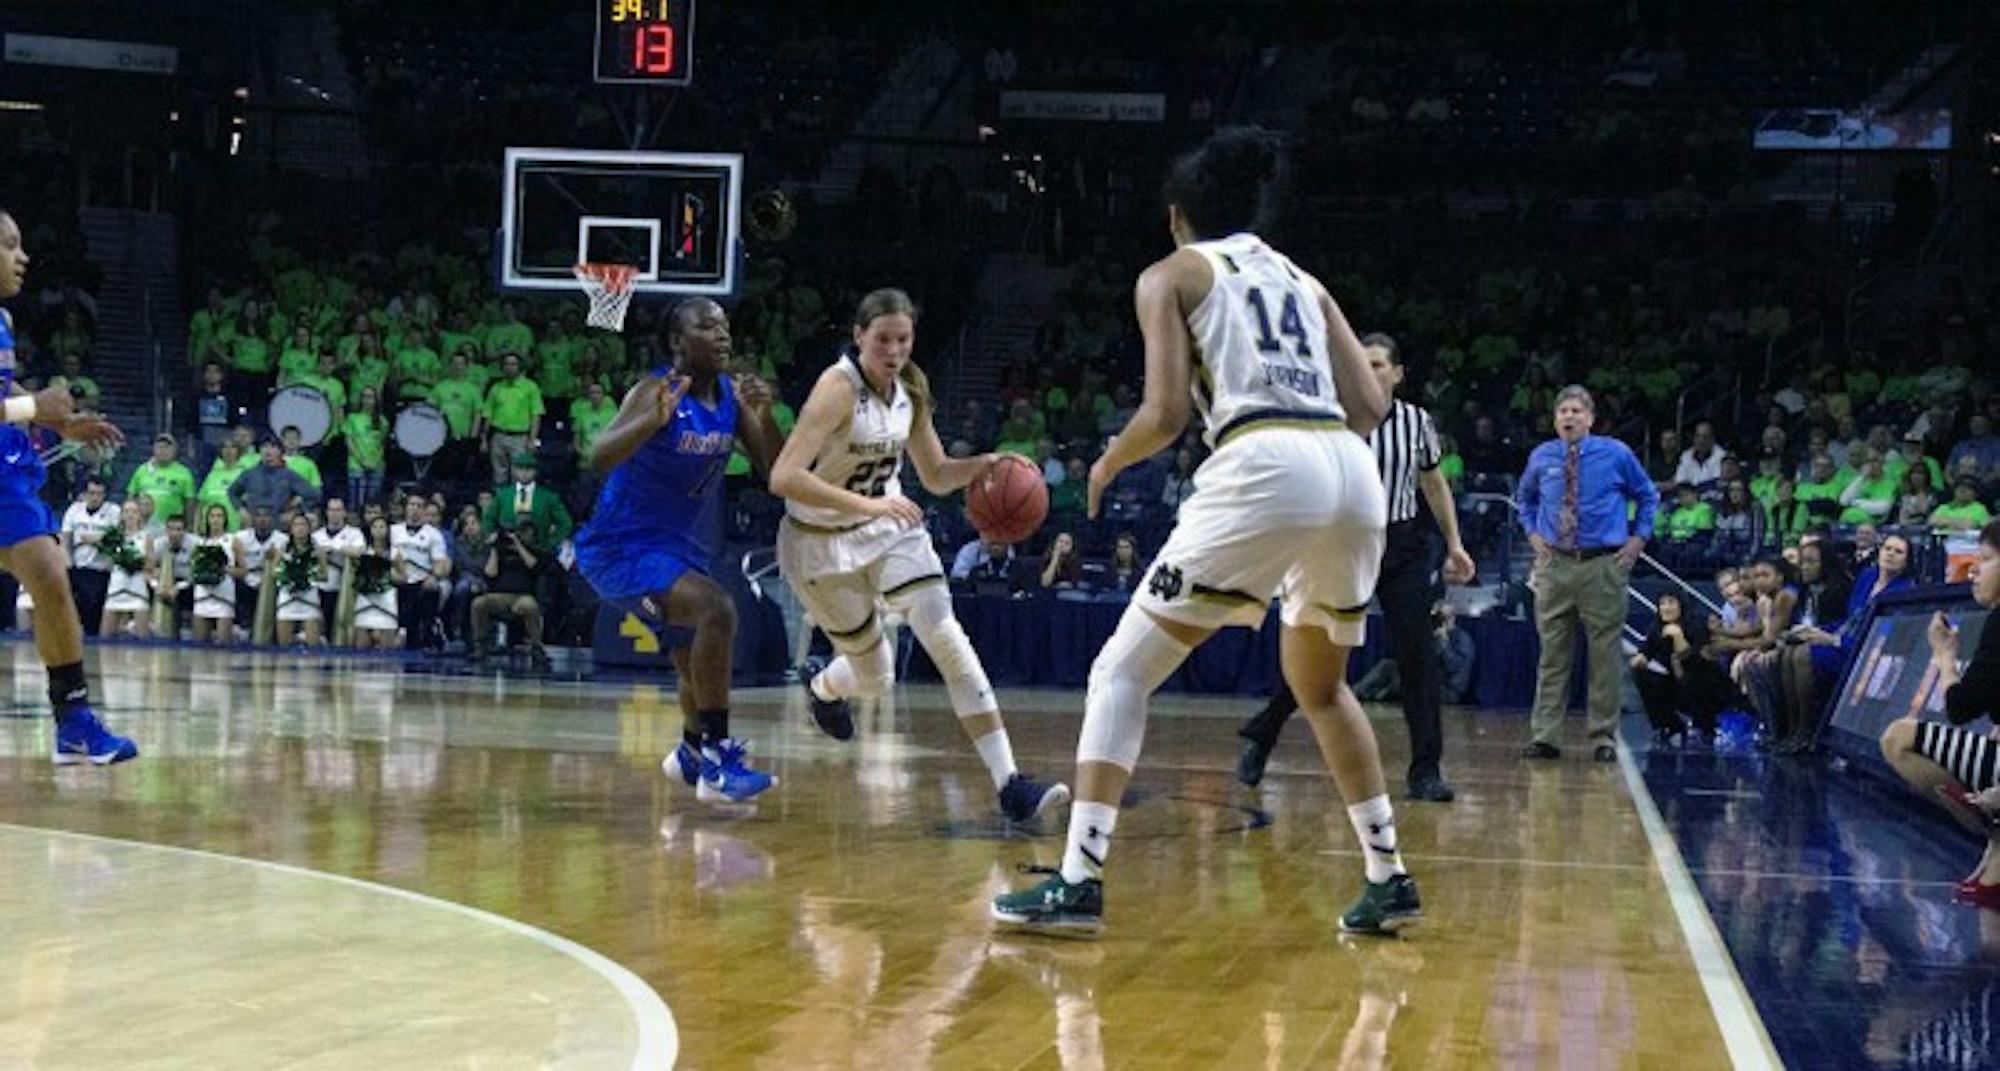 Graduate student guard Madison Cable pushes the ball upcourt past a DePaul defender during Notre Dame’s 95-90 victory over the Blue Demons on Wednesday night at Purcell Pavilion. Cable led the Irish with 21 points.